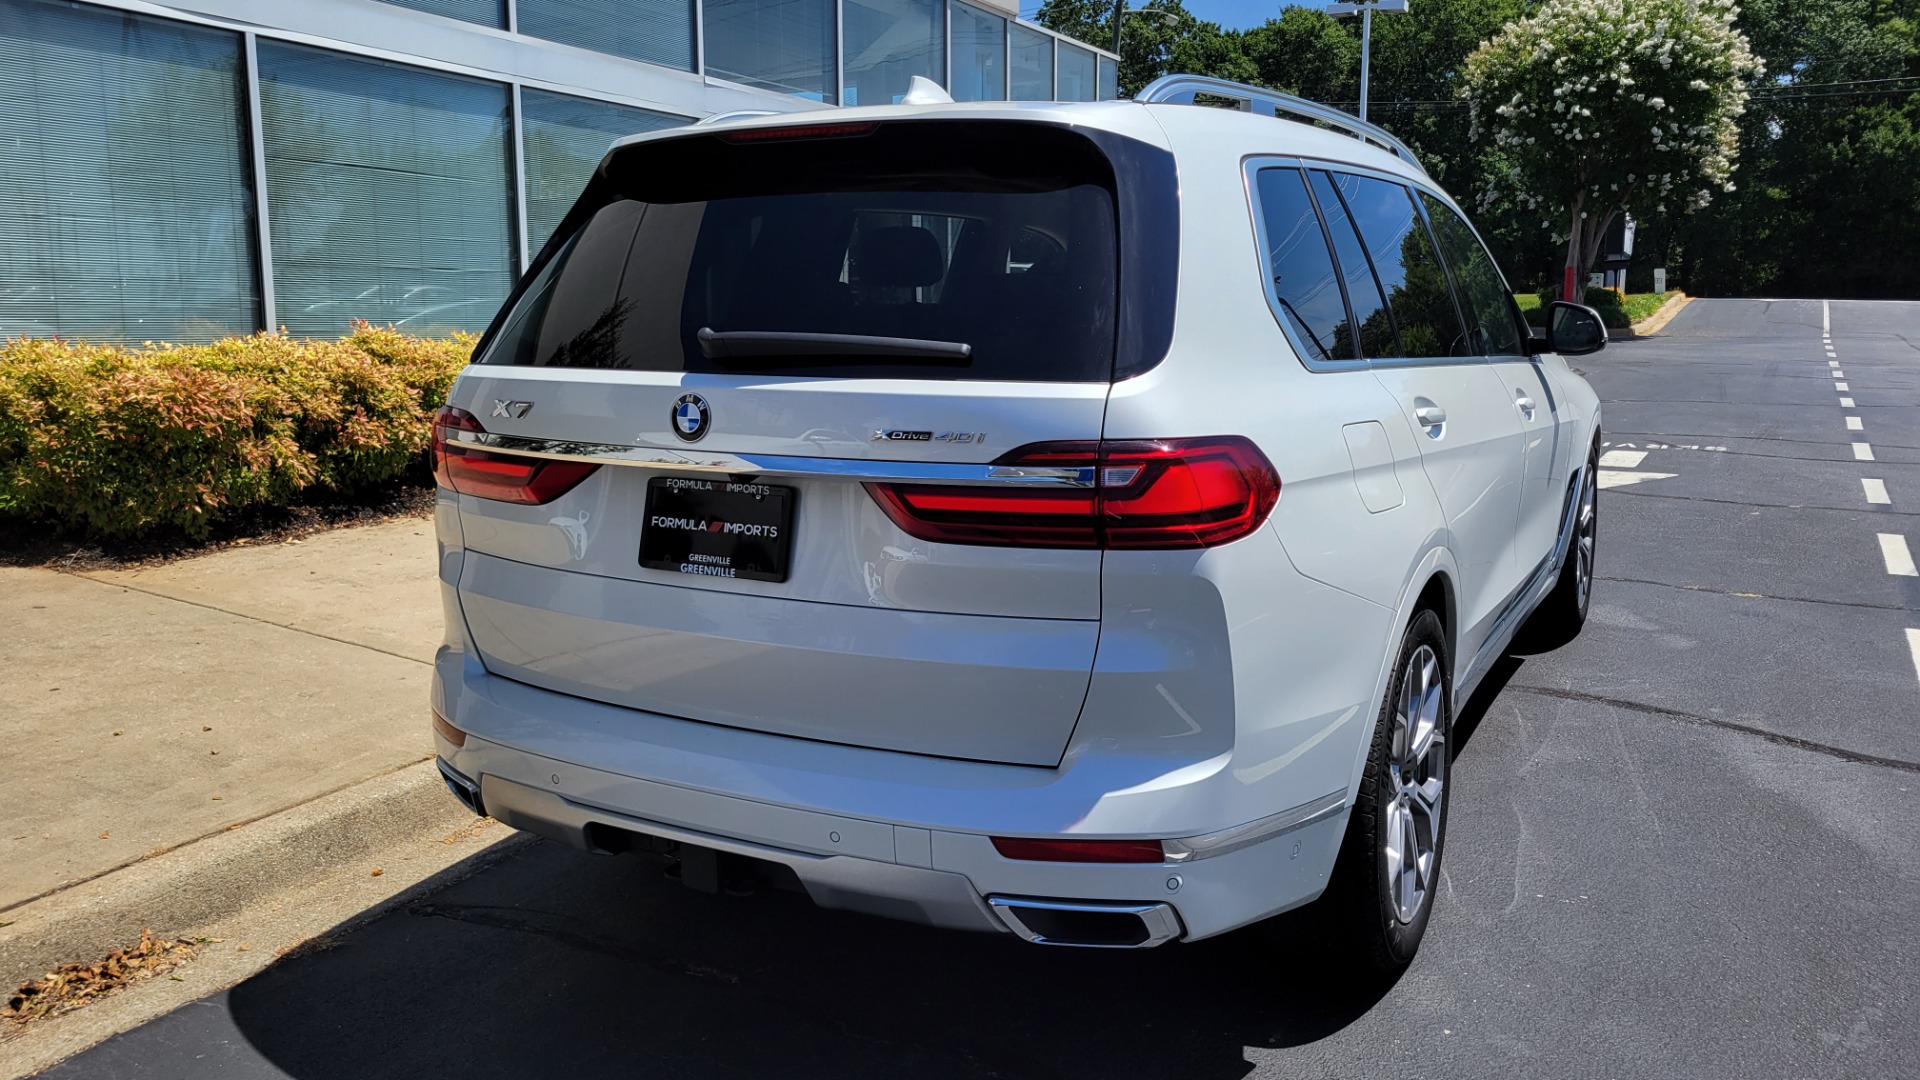 Used 2019 BMW X7 XDRIVE40I PREMIUM / NAV / HUD / PARK ASST PLUS / REMOTE START / 3D VIEW for sale $71,095 at Formula Imports in Charlotte NC 28227 8